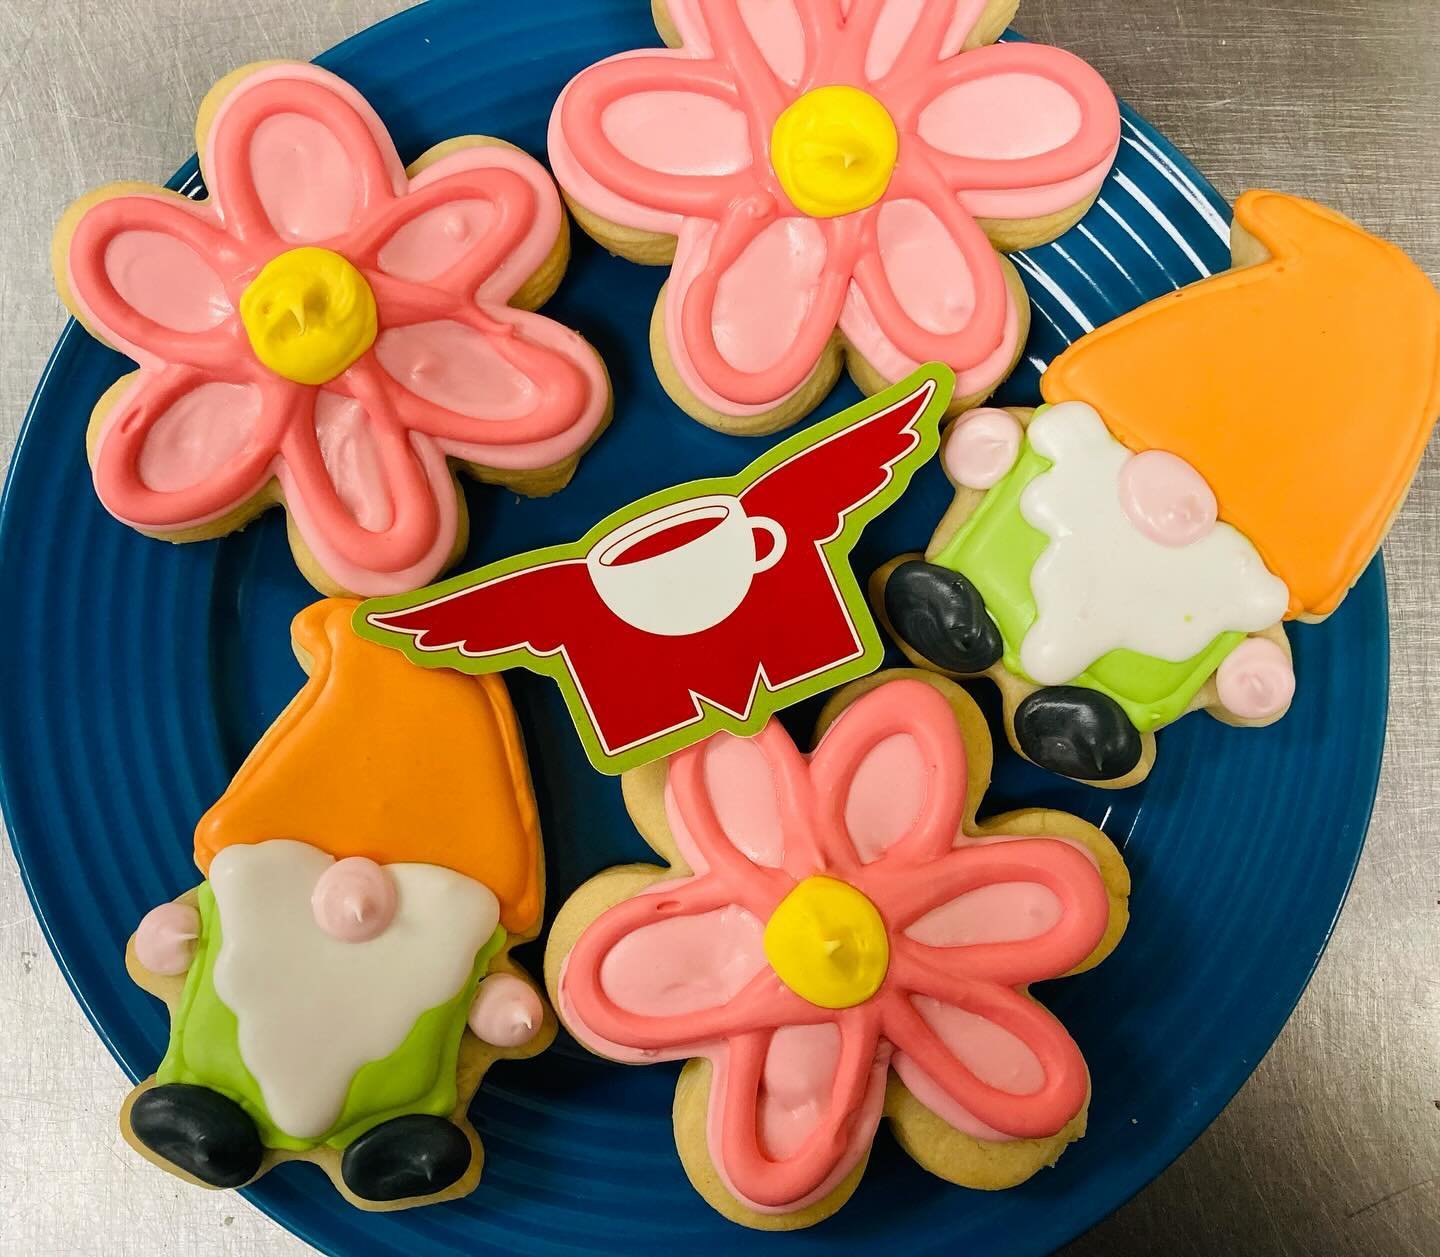 Sugar Cookie Friday strikes again&hellip;these little guys are headed into the case now! Get out and enjoy this beautiful sunshine! ☀️#flyingmboise #flyingm #downtownboise